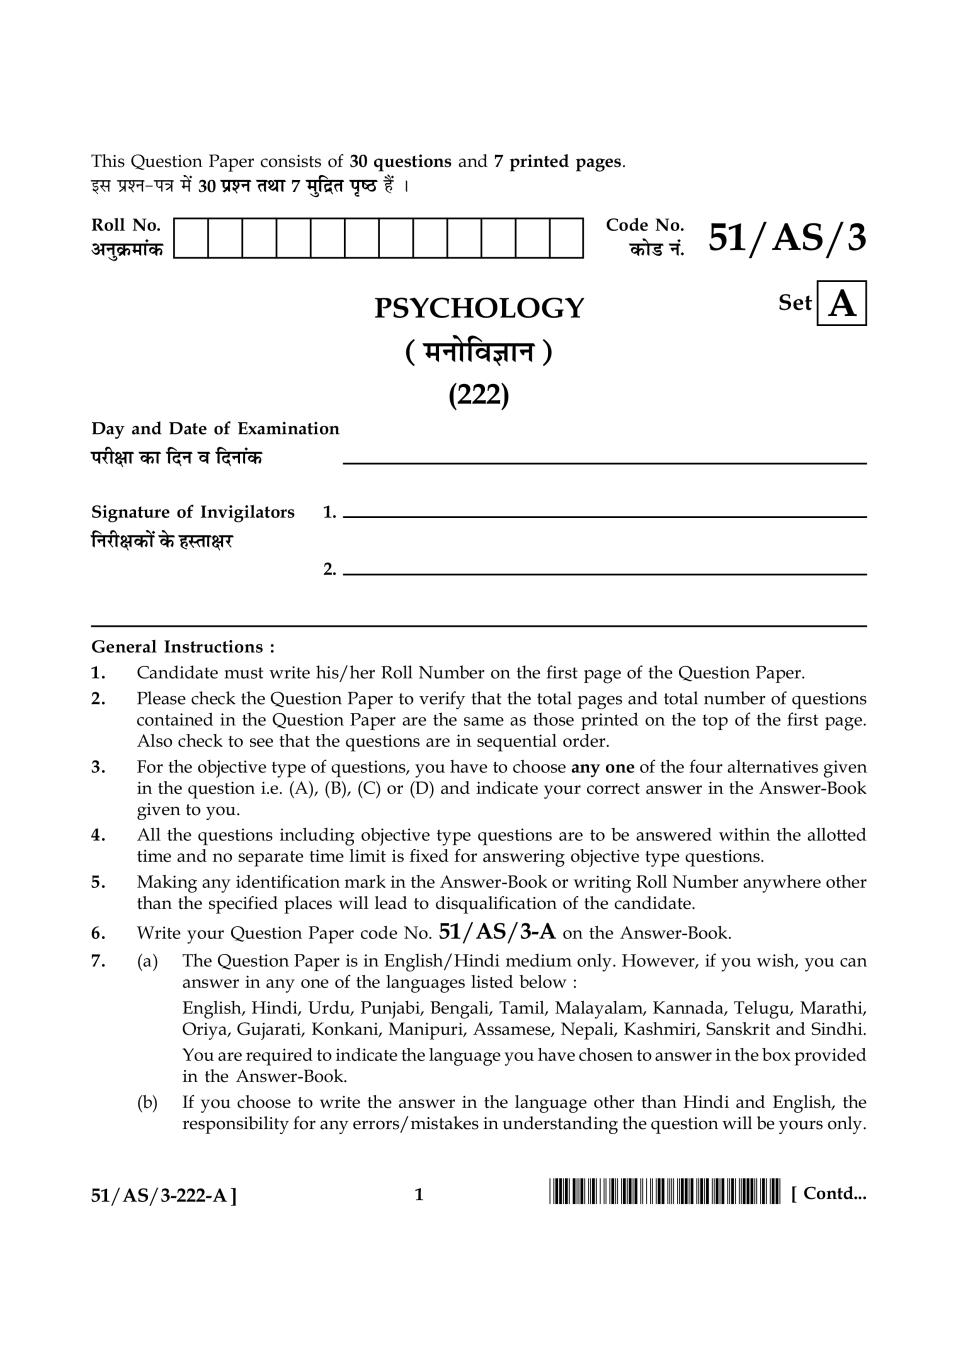 NIOS Class 10 Question Paper Oct 2015 - Psychology - Page 1